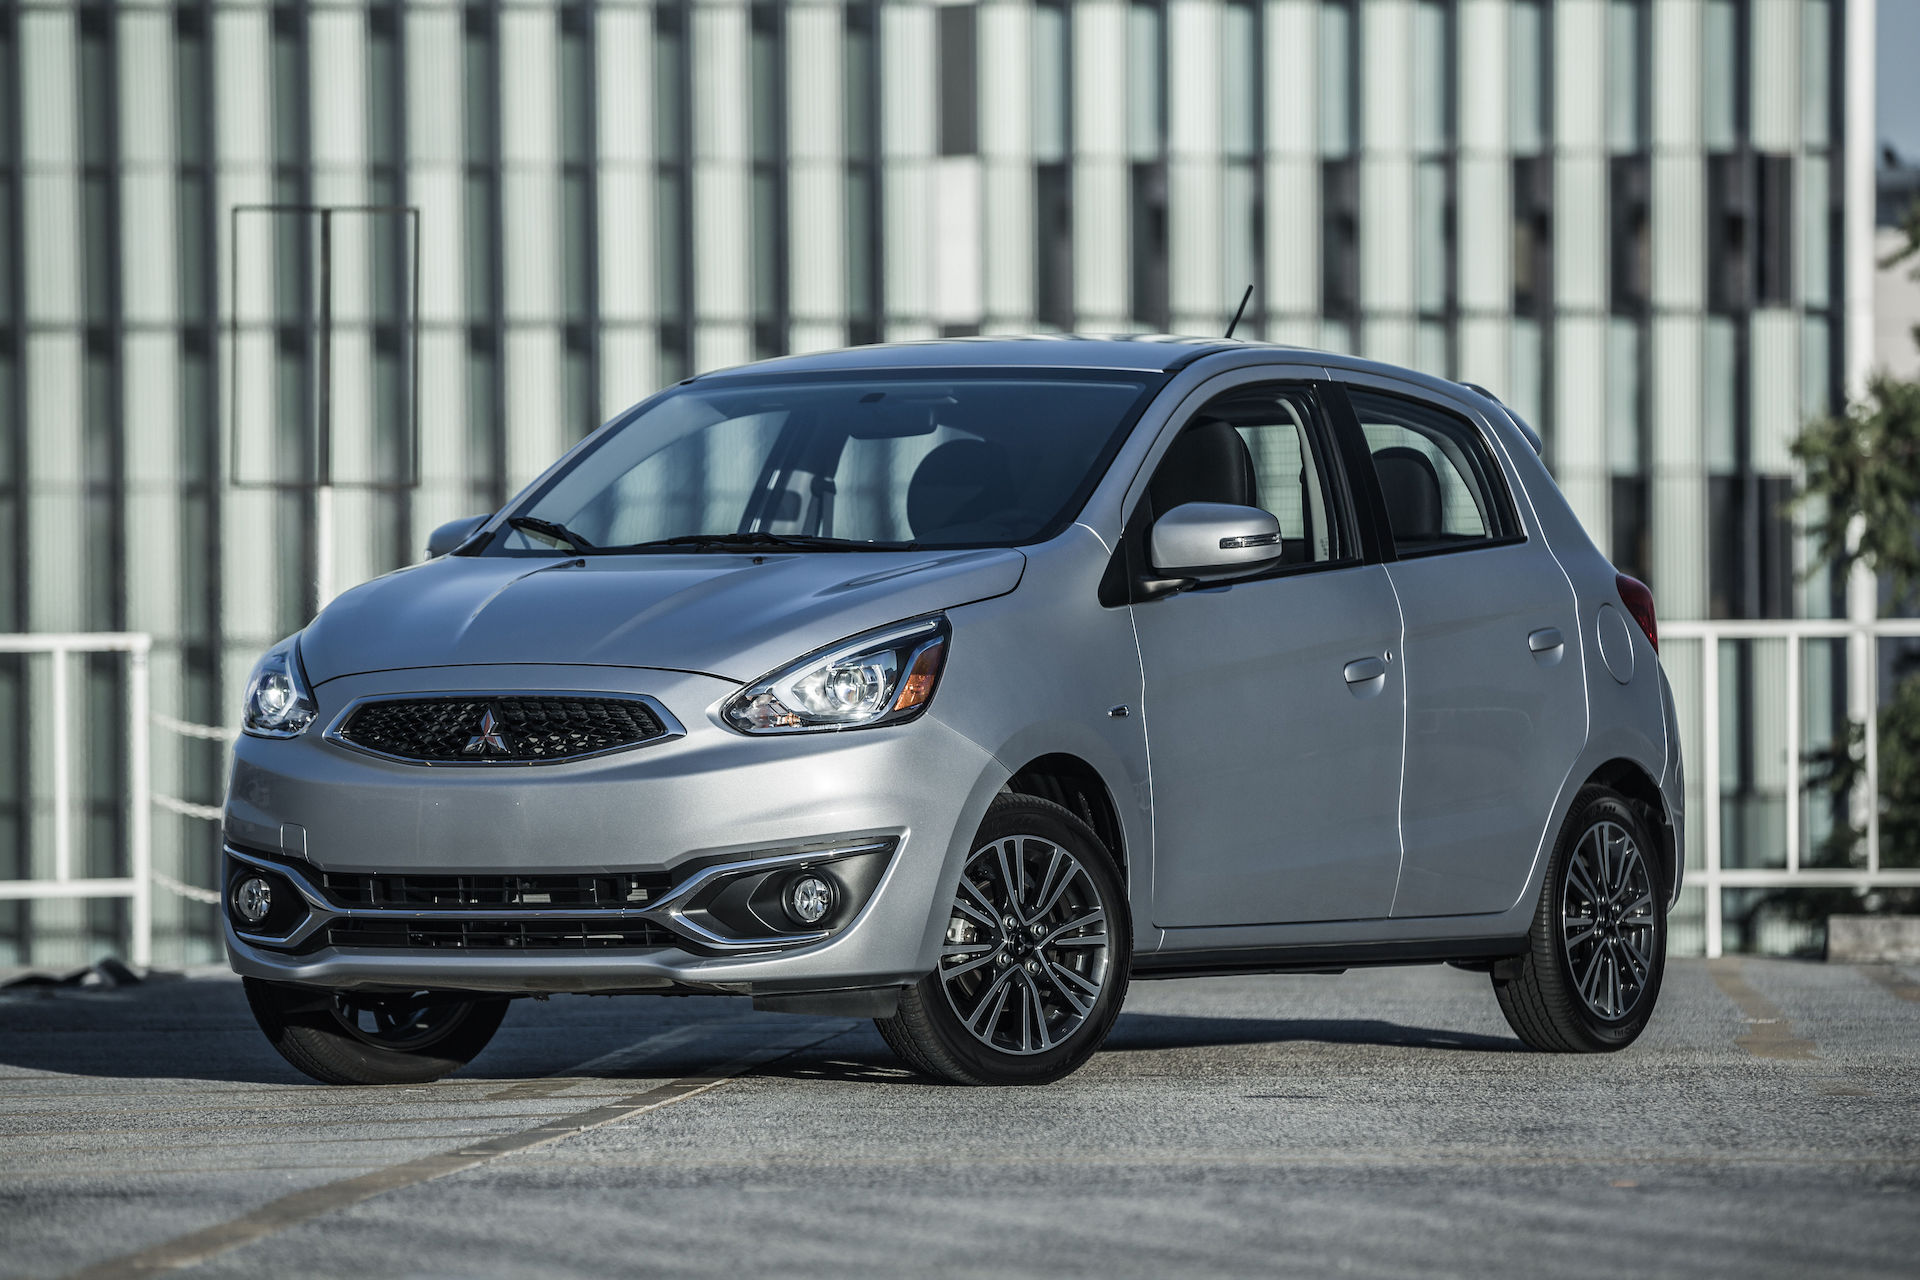 2020 Mitsubishi Mirage Review, Ratings, Specs, Prices, and Photos The